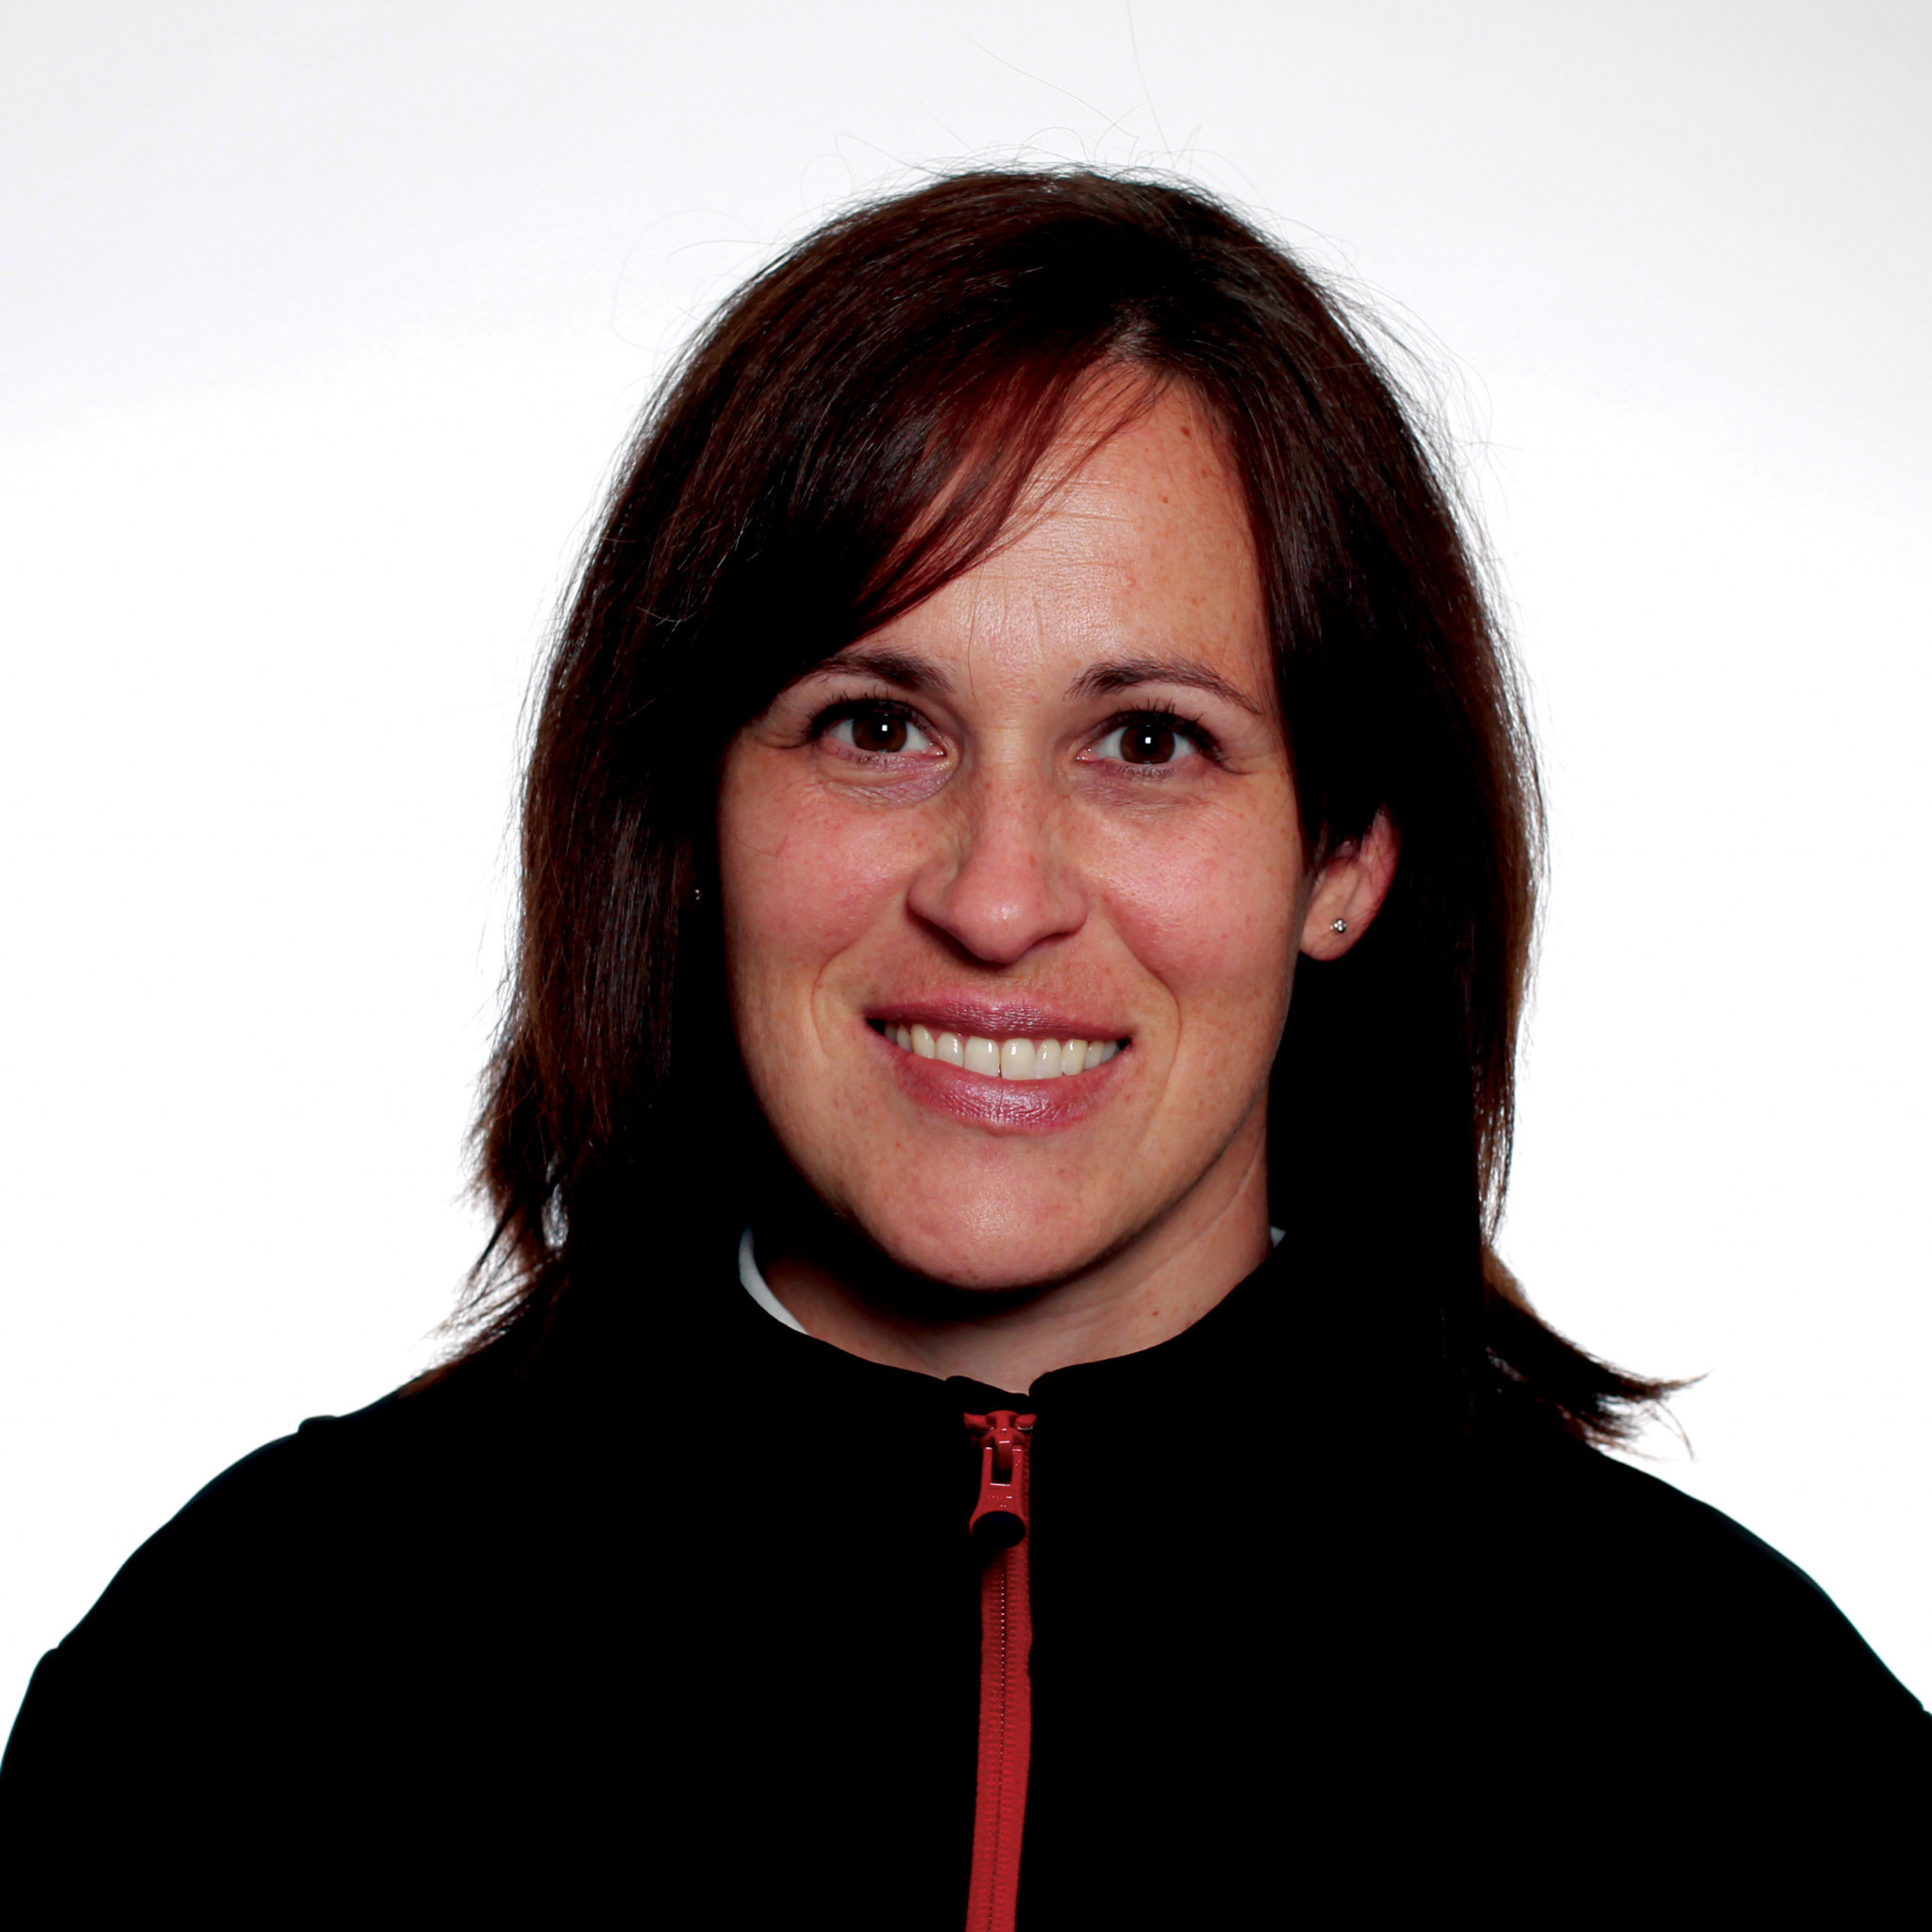 Coaching Association of Canada sport safety director Isabelle Cayer said she was 